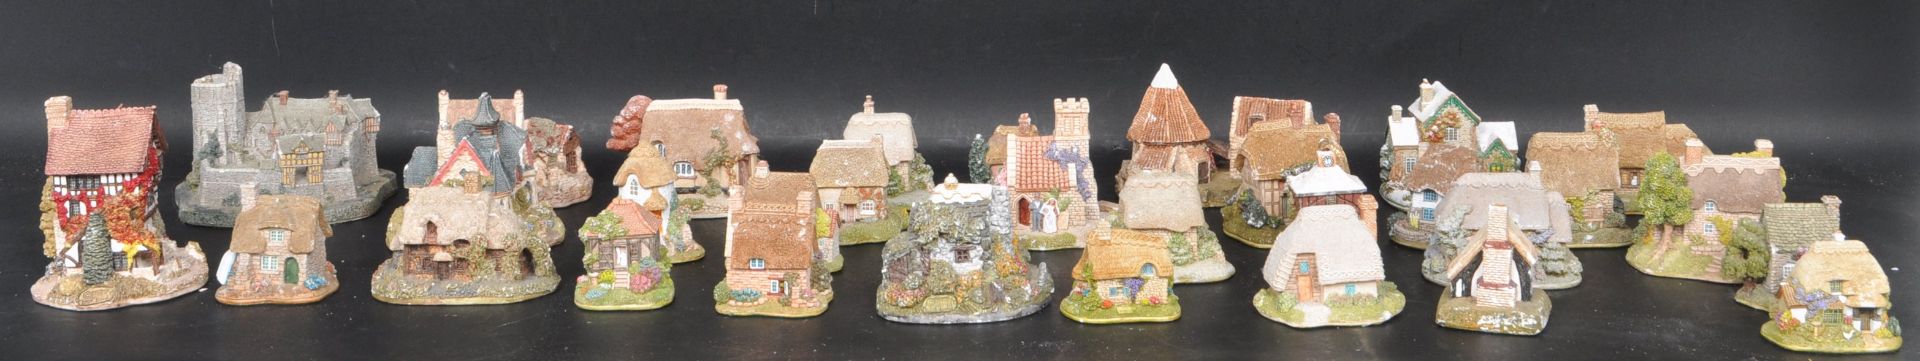 LARGE COLLECTION OF VINTAGE 20TH CENTURY LILLIPUT LANE - Image 4 of 7